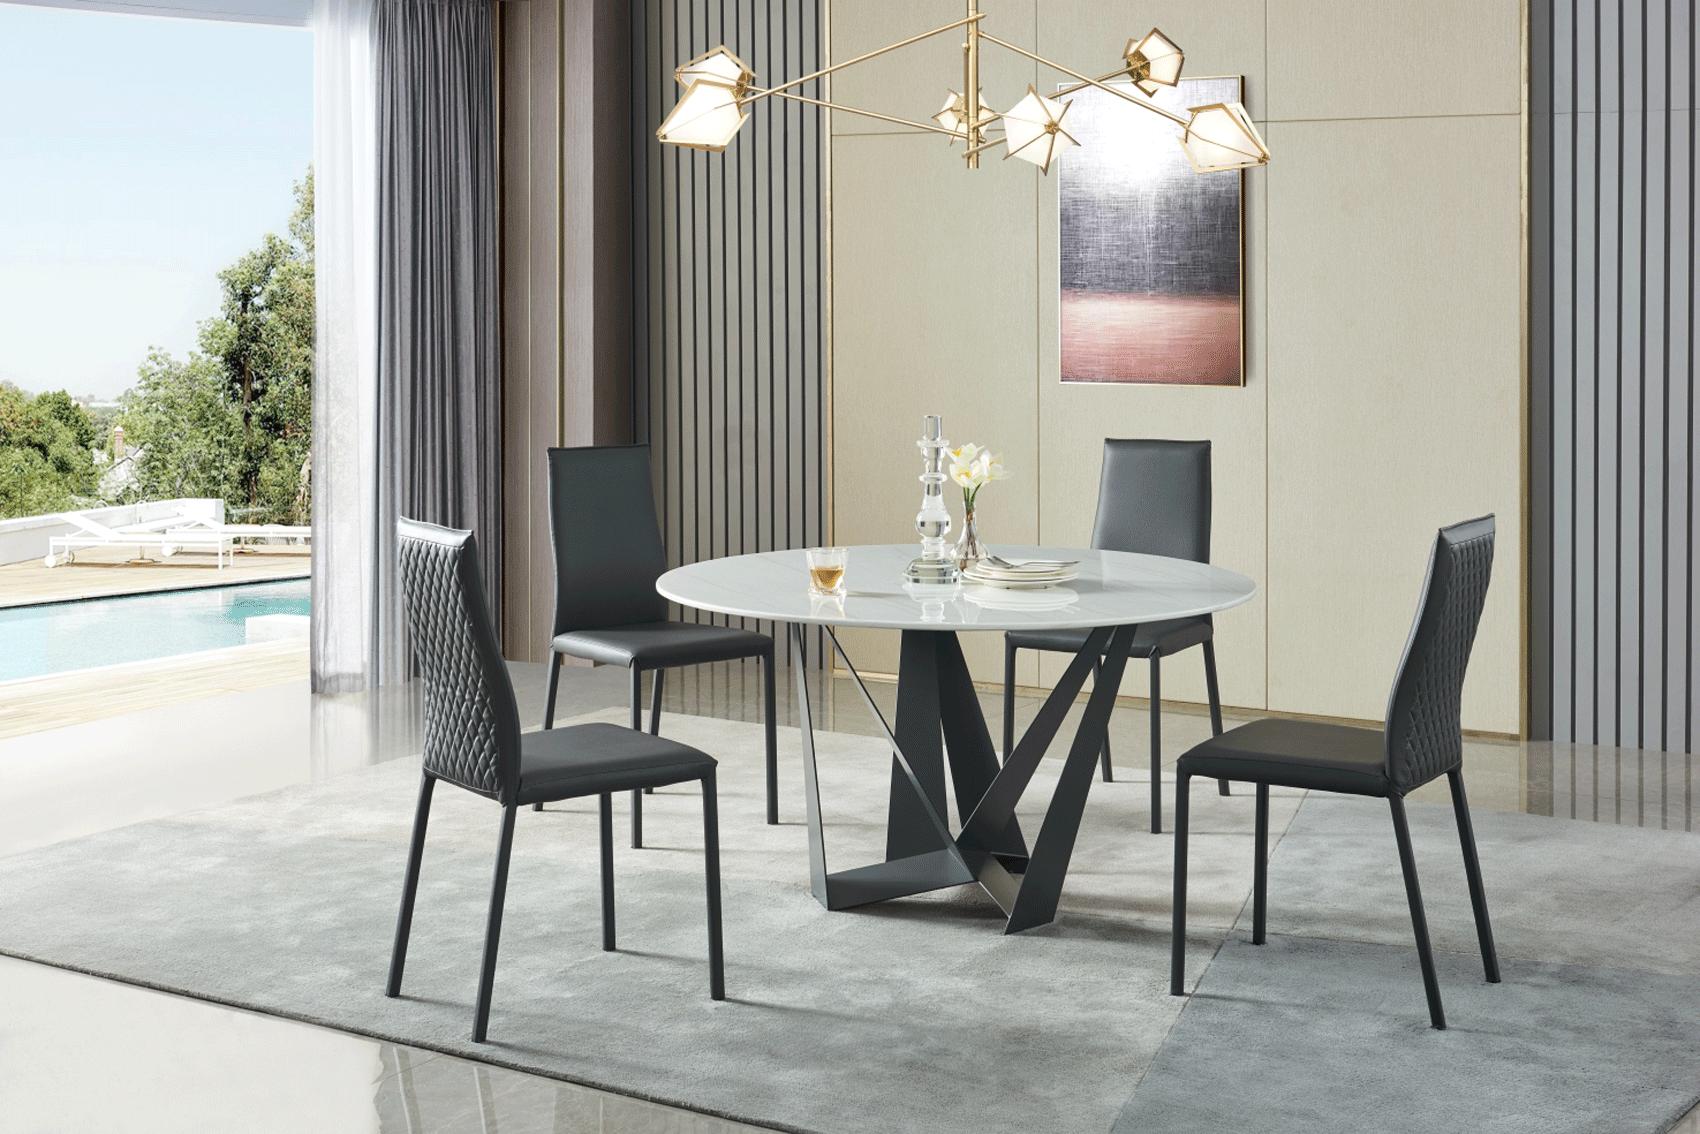 Contemporary Dining Table Set 102DININGTABLE 102DININGTABLE-5PC in Dark Grey, White Eco Leather